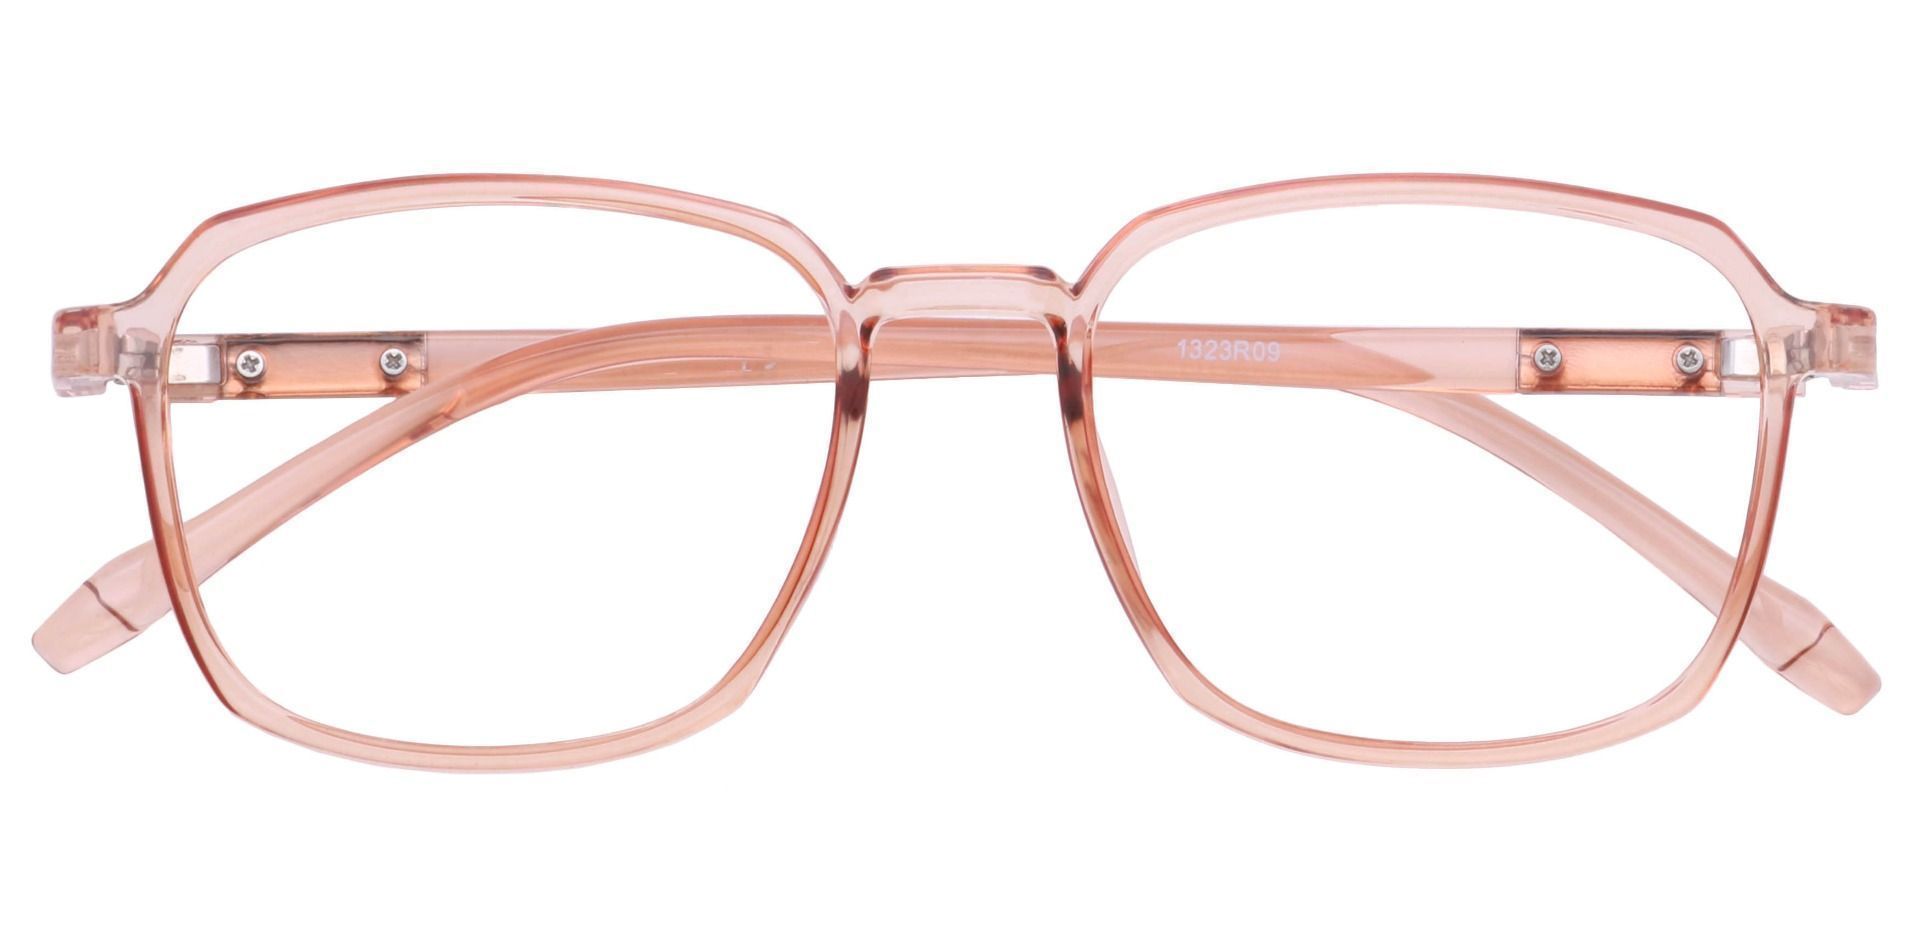 Stella Square Reading Glasses - The Frame Is Red And Clear